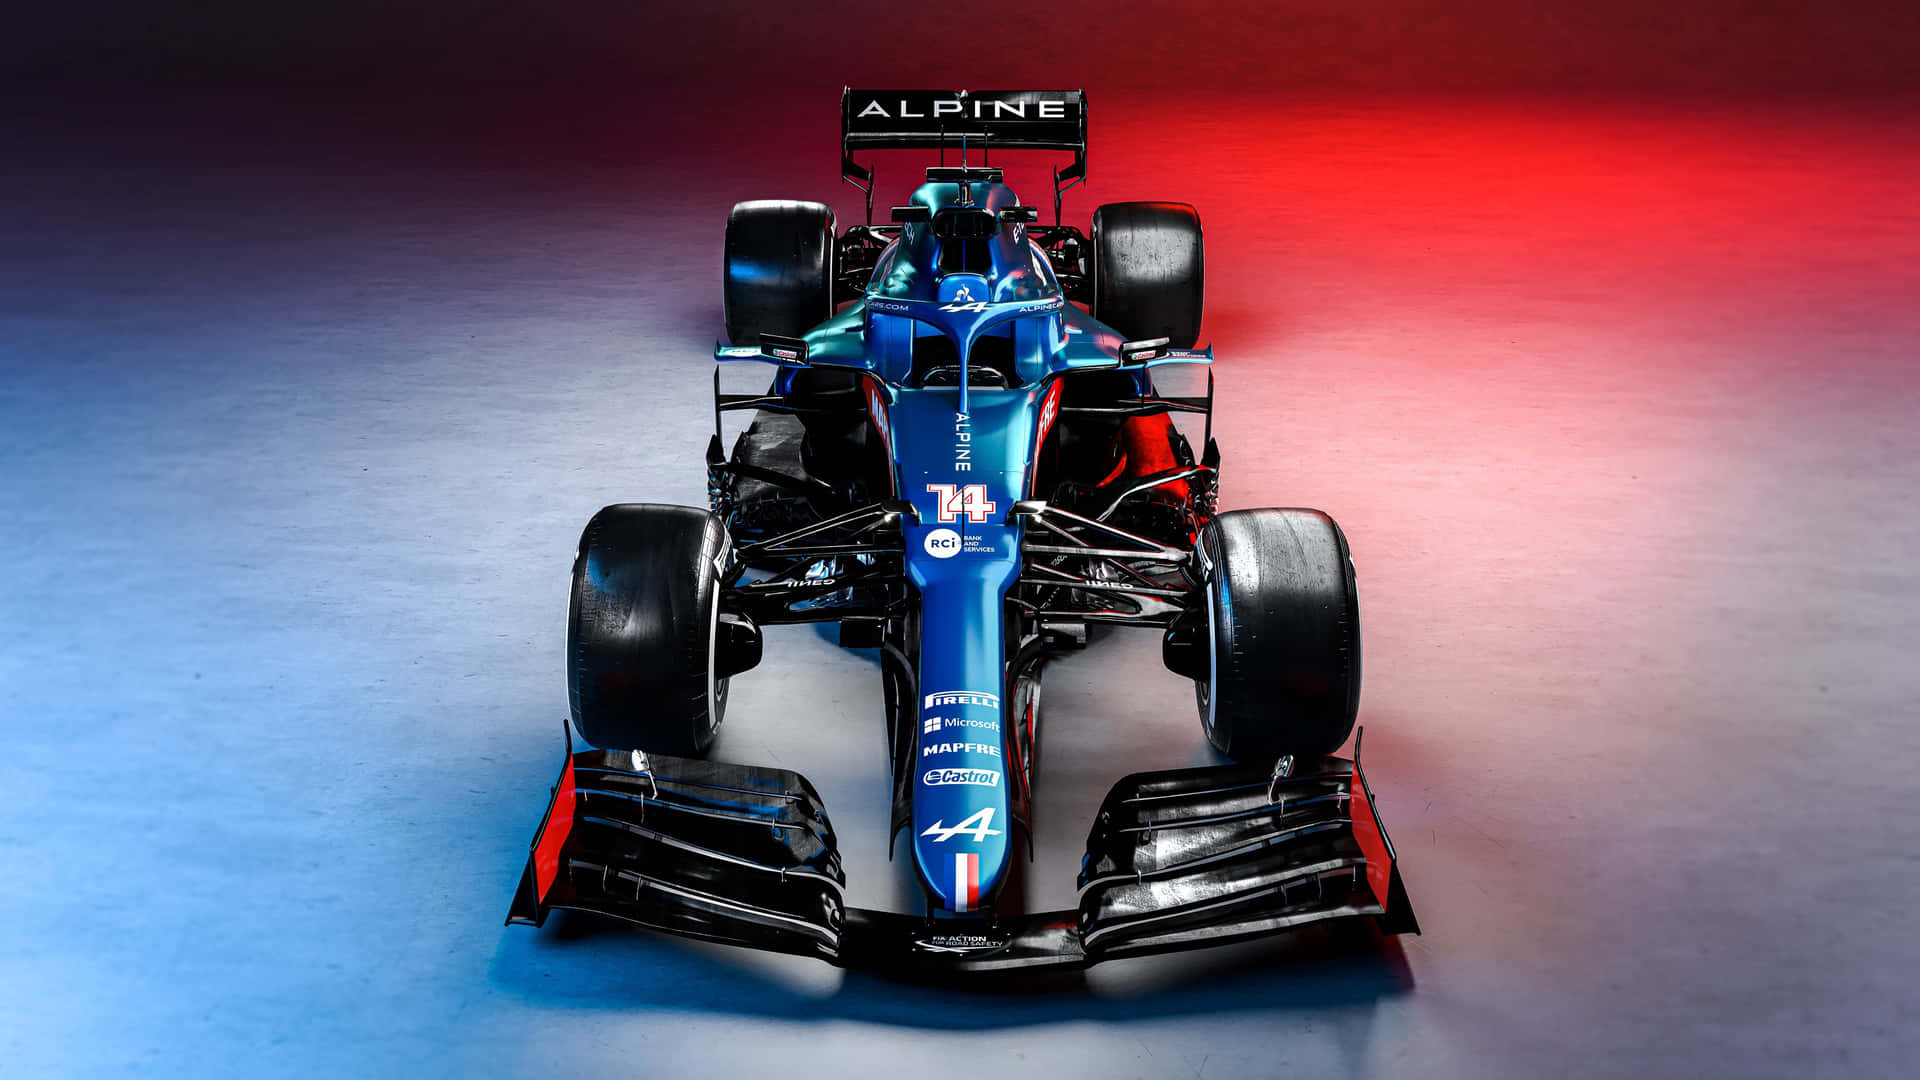 A Blue And Red Racing Car In A Dark Room Wallpaper